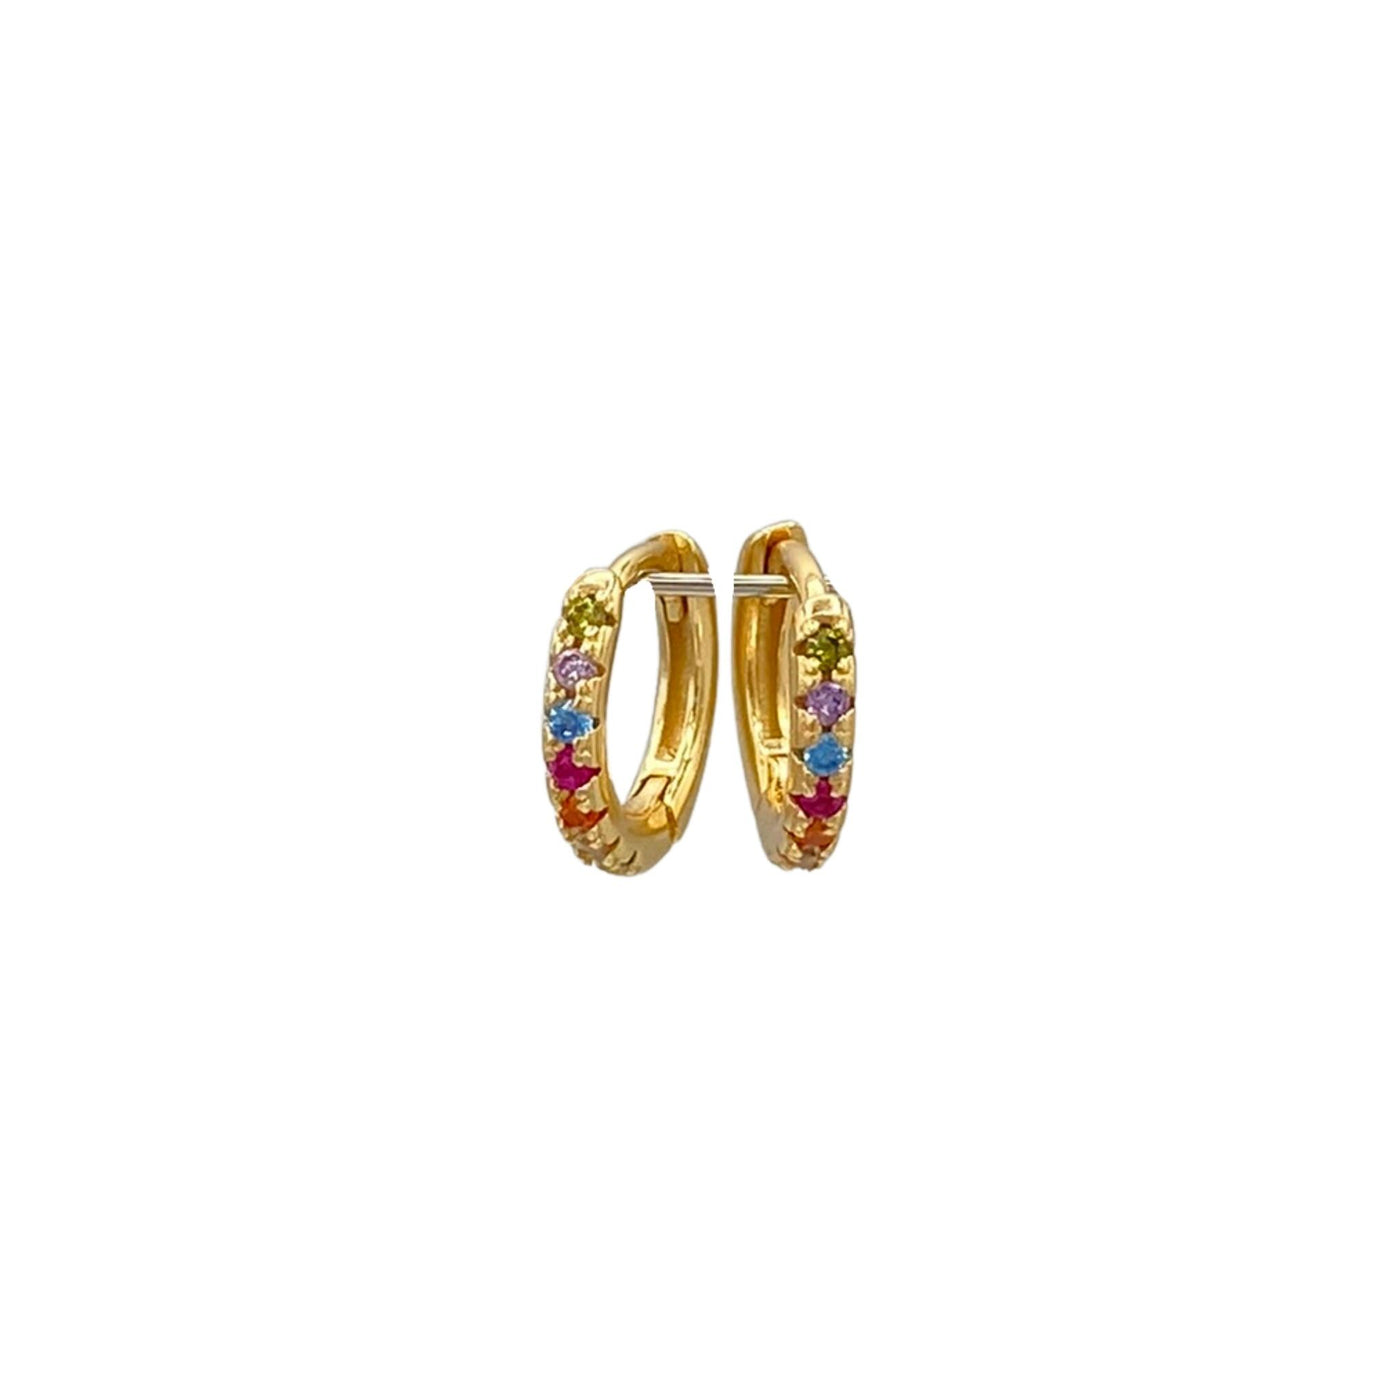 Silver hoop earrings with stones - yellow - 10 mm